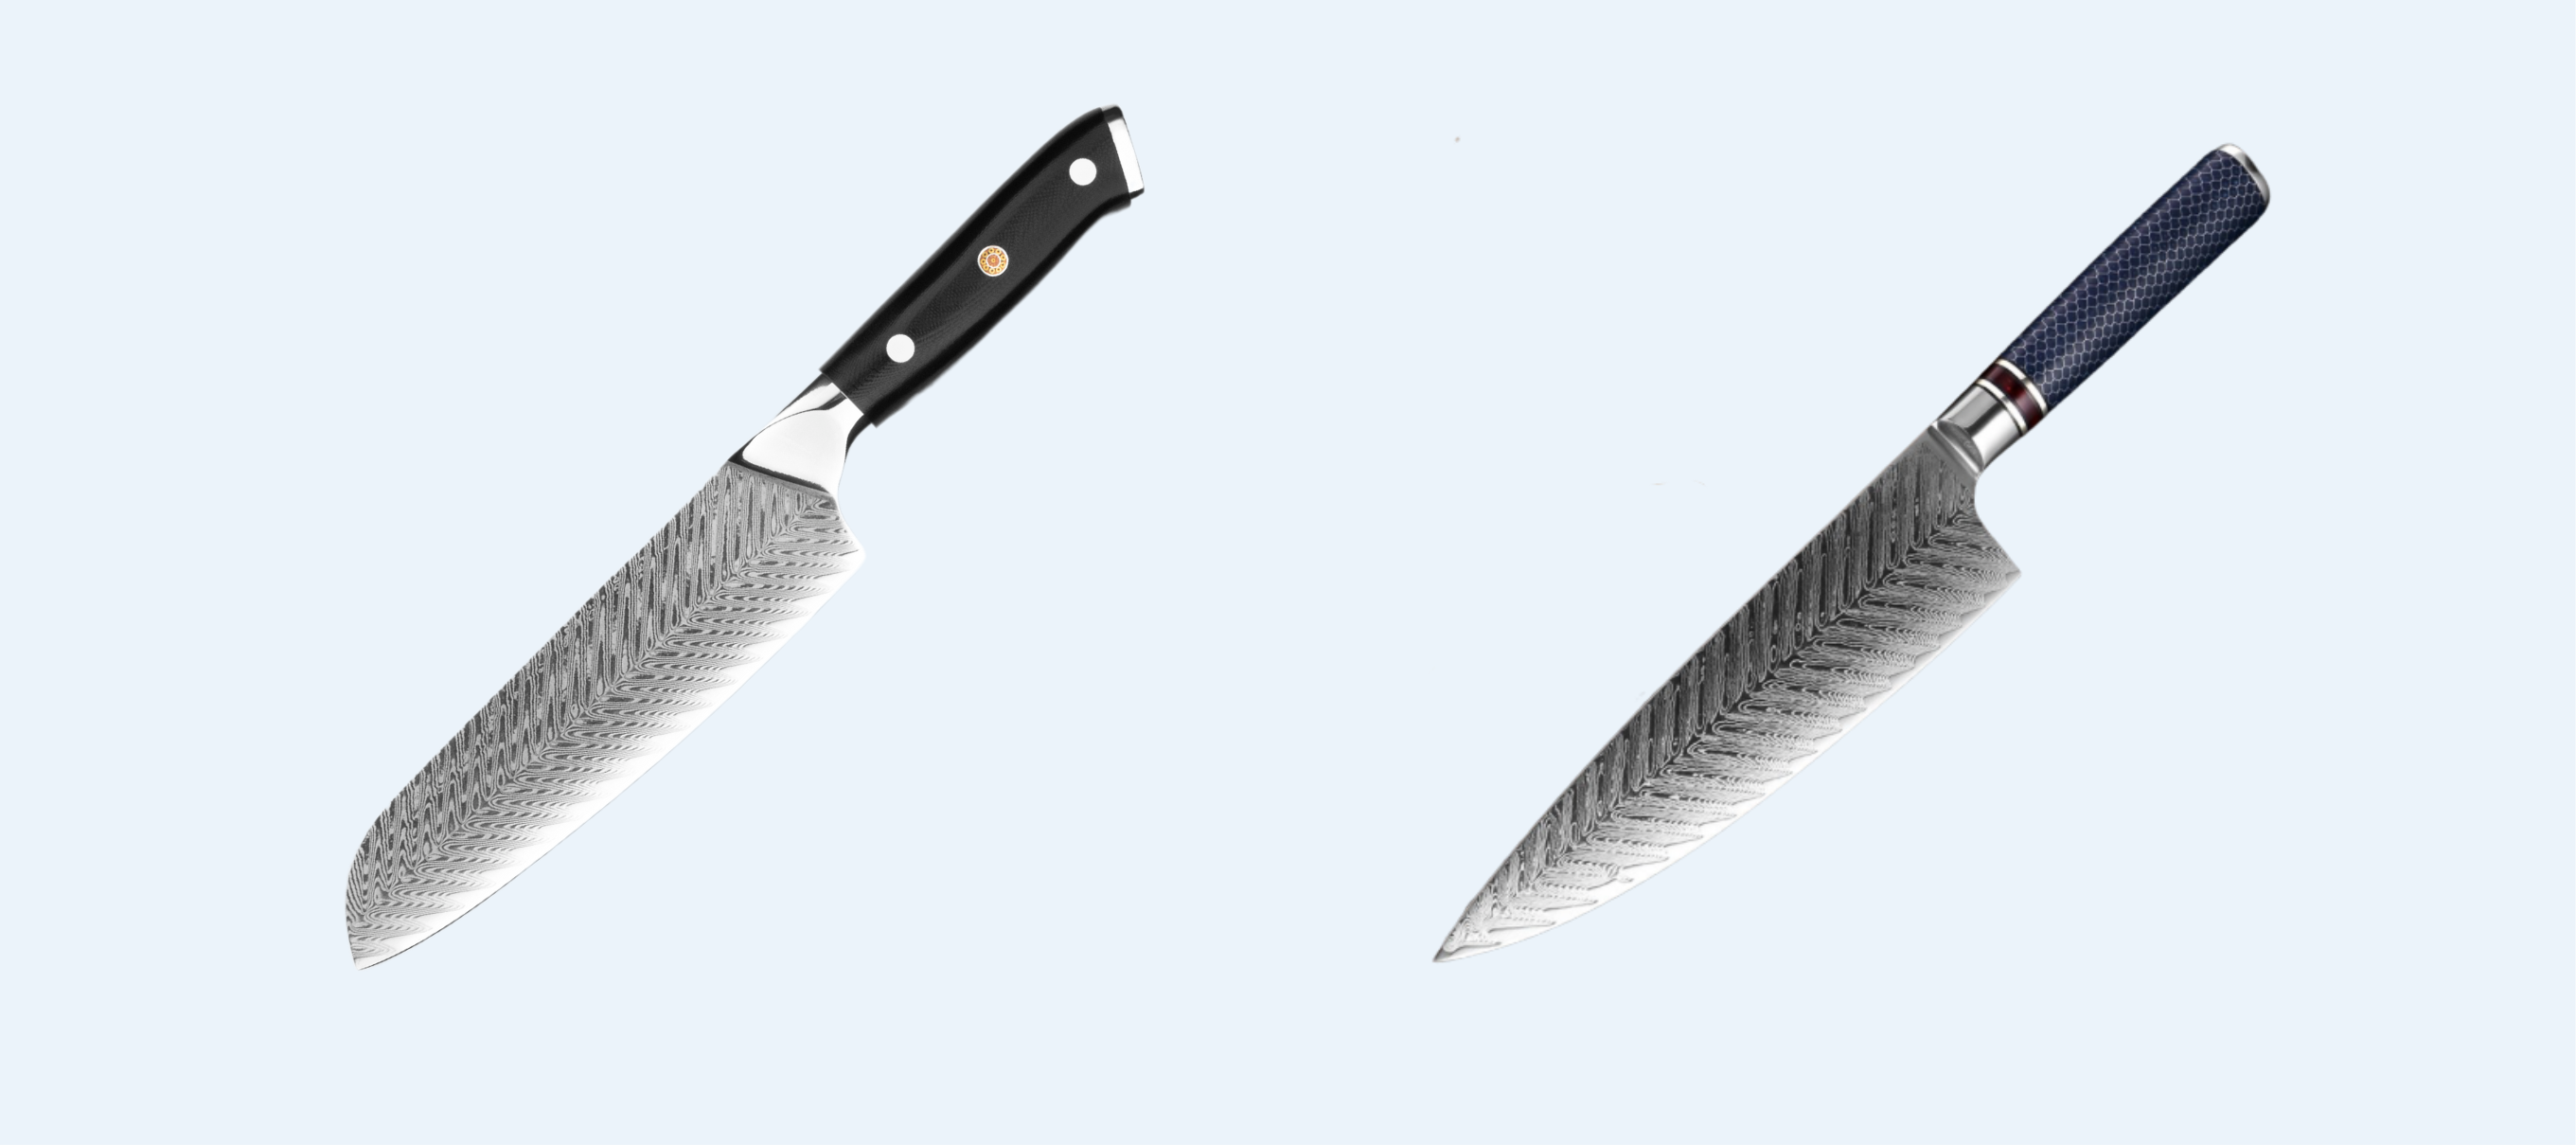 Chef's knife vs santoku. What are the differences?